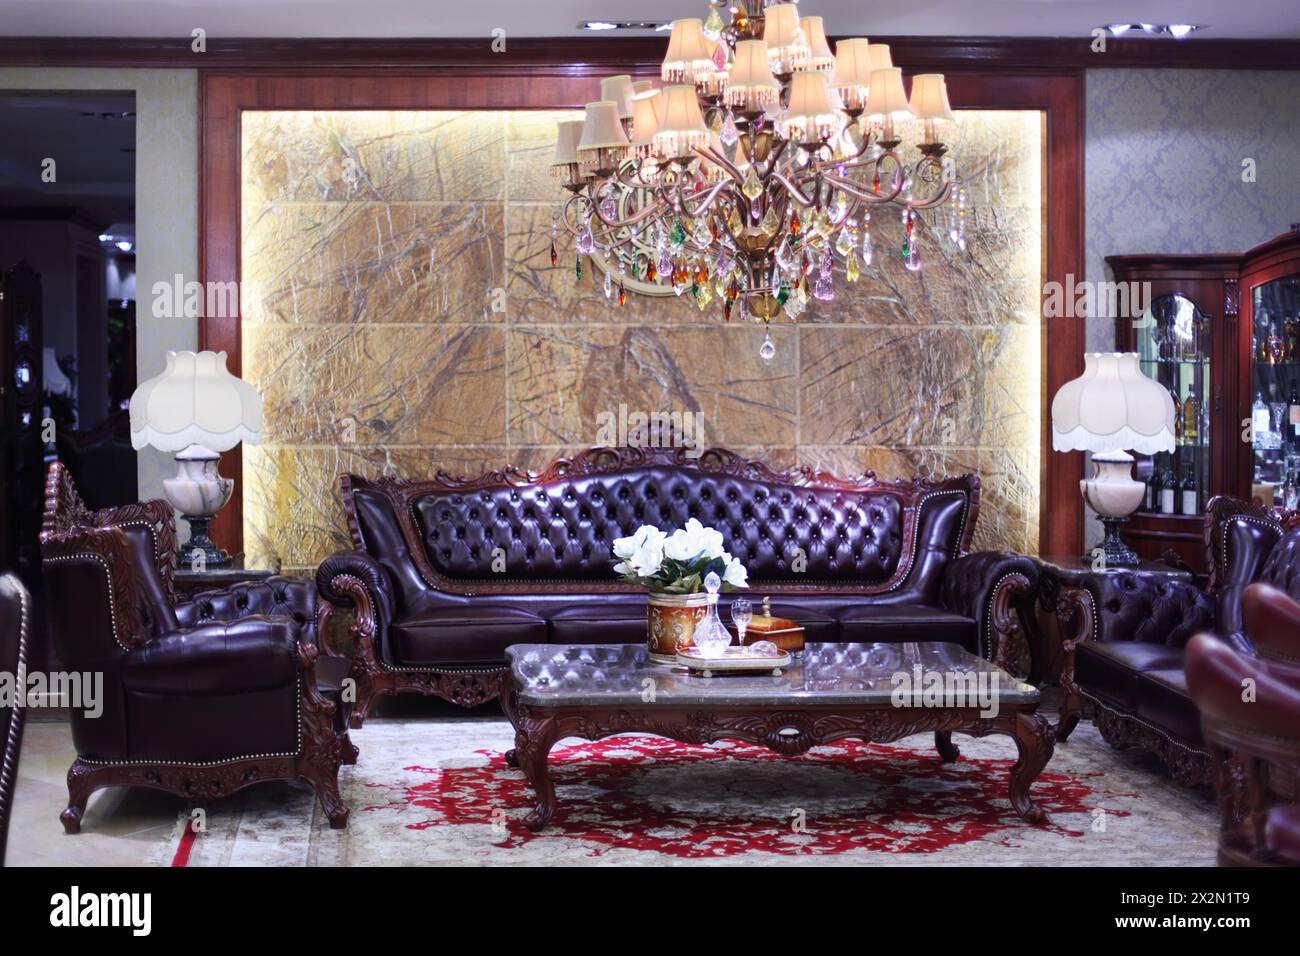 FOSHAN - NOVEMBER 21: Room with sofa in classic style in Louvre furniture trade center on November 21, 2011 in Foshan near Guangzhou, China. Many cust Stock Photo